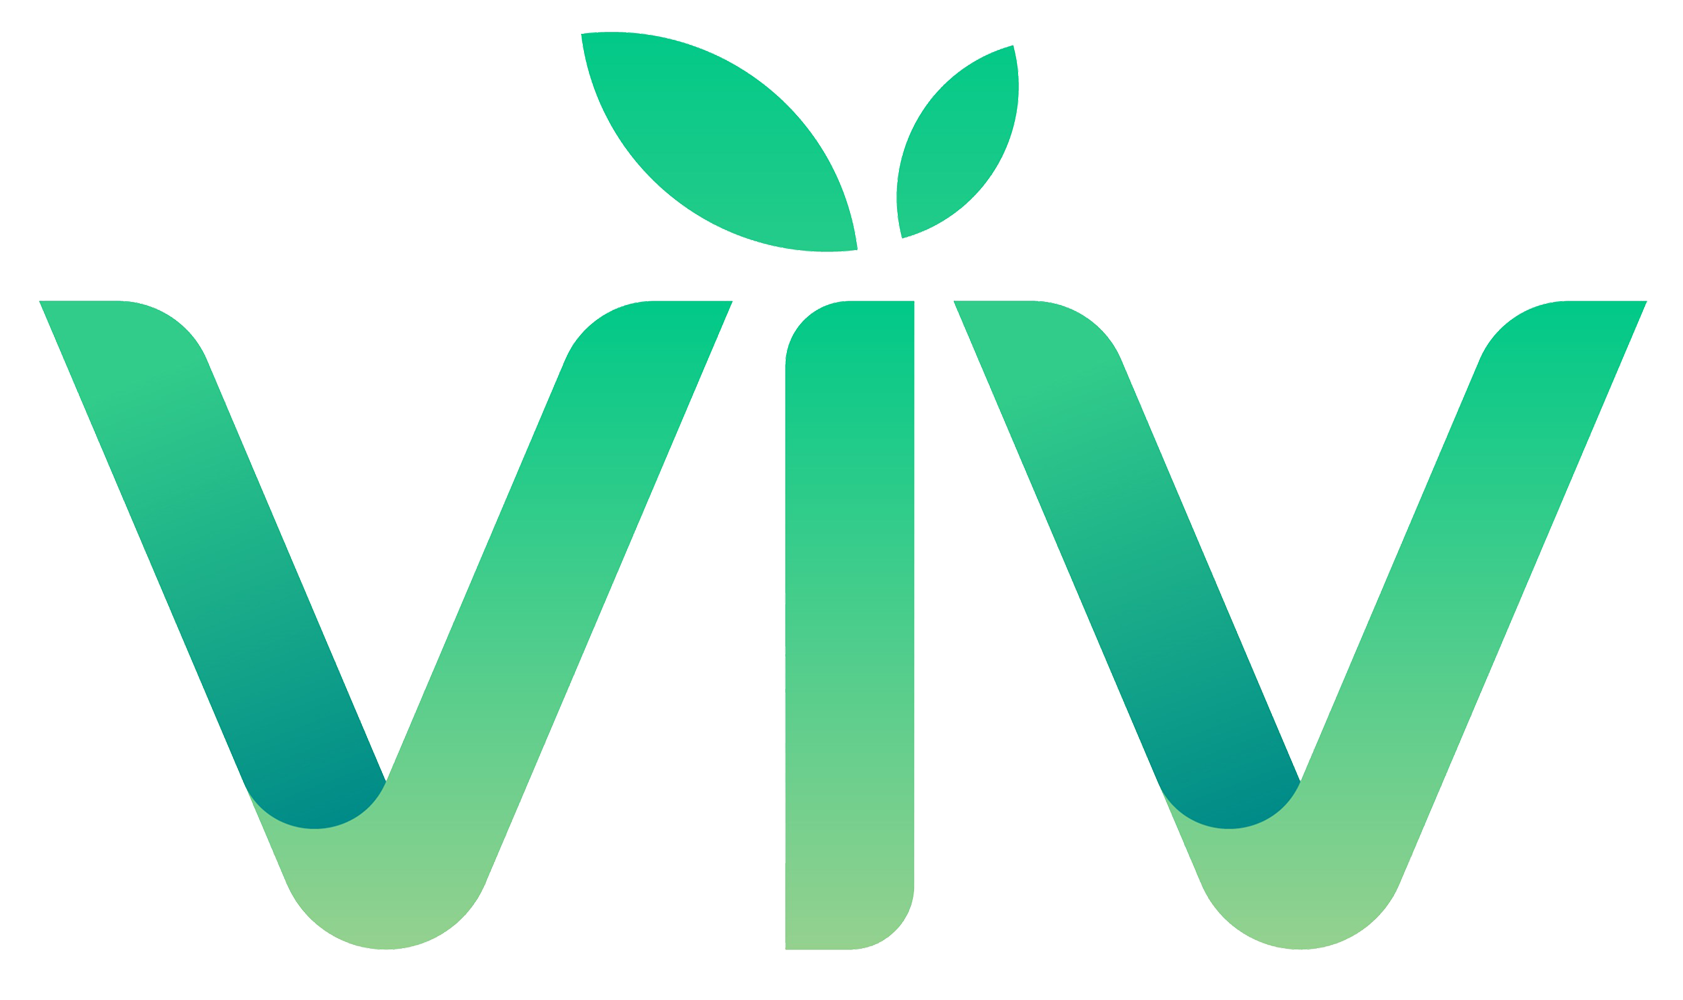 The word viv is written in green letters on a white background.